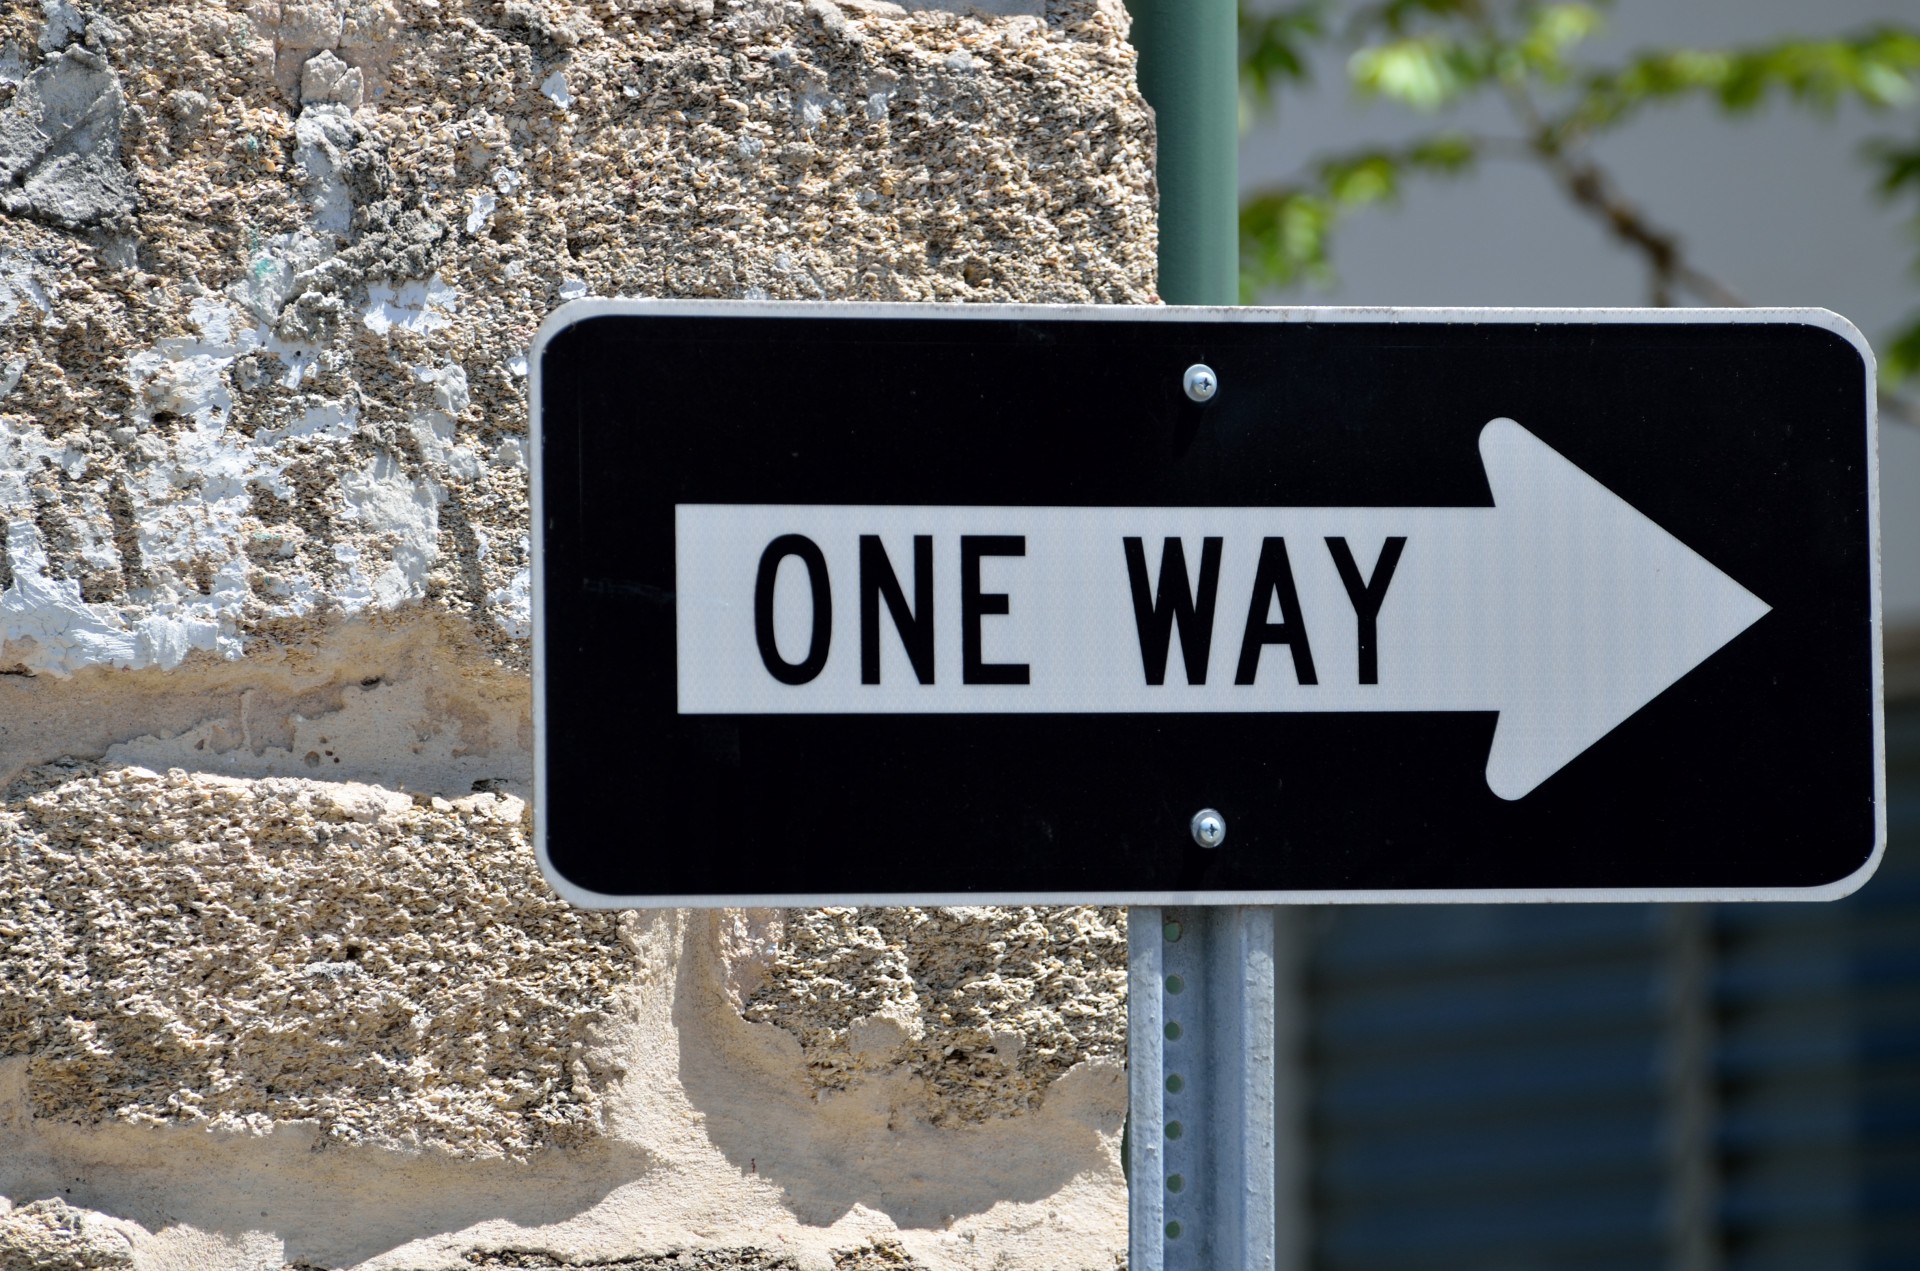 One Way Sign Free Stock Photo Public Domain Pictures